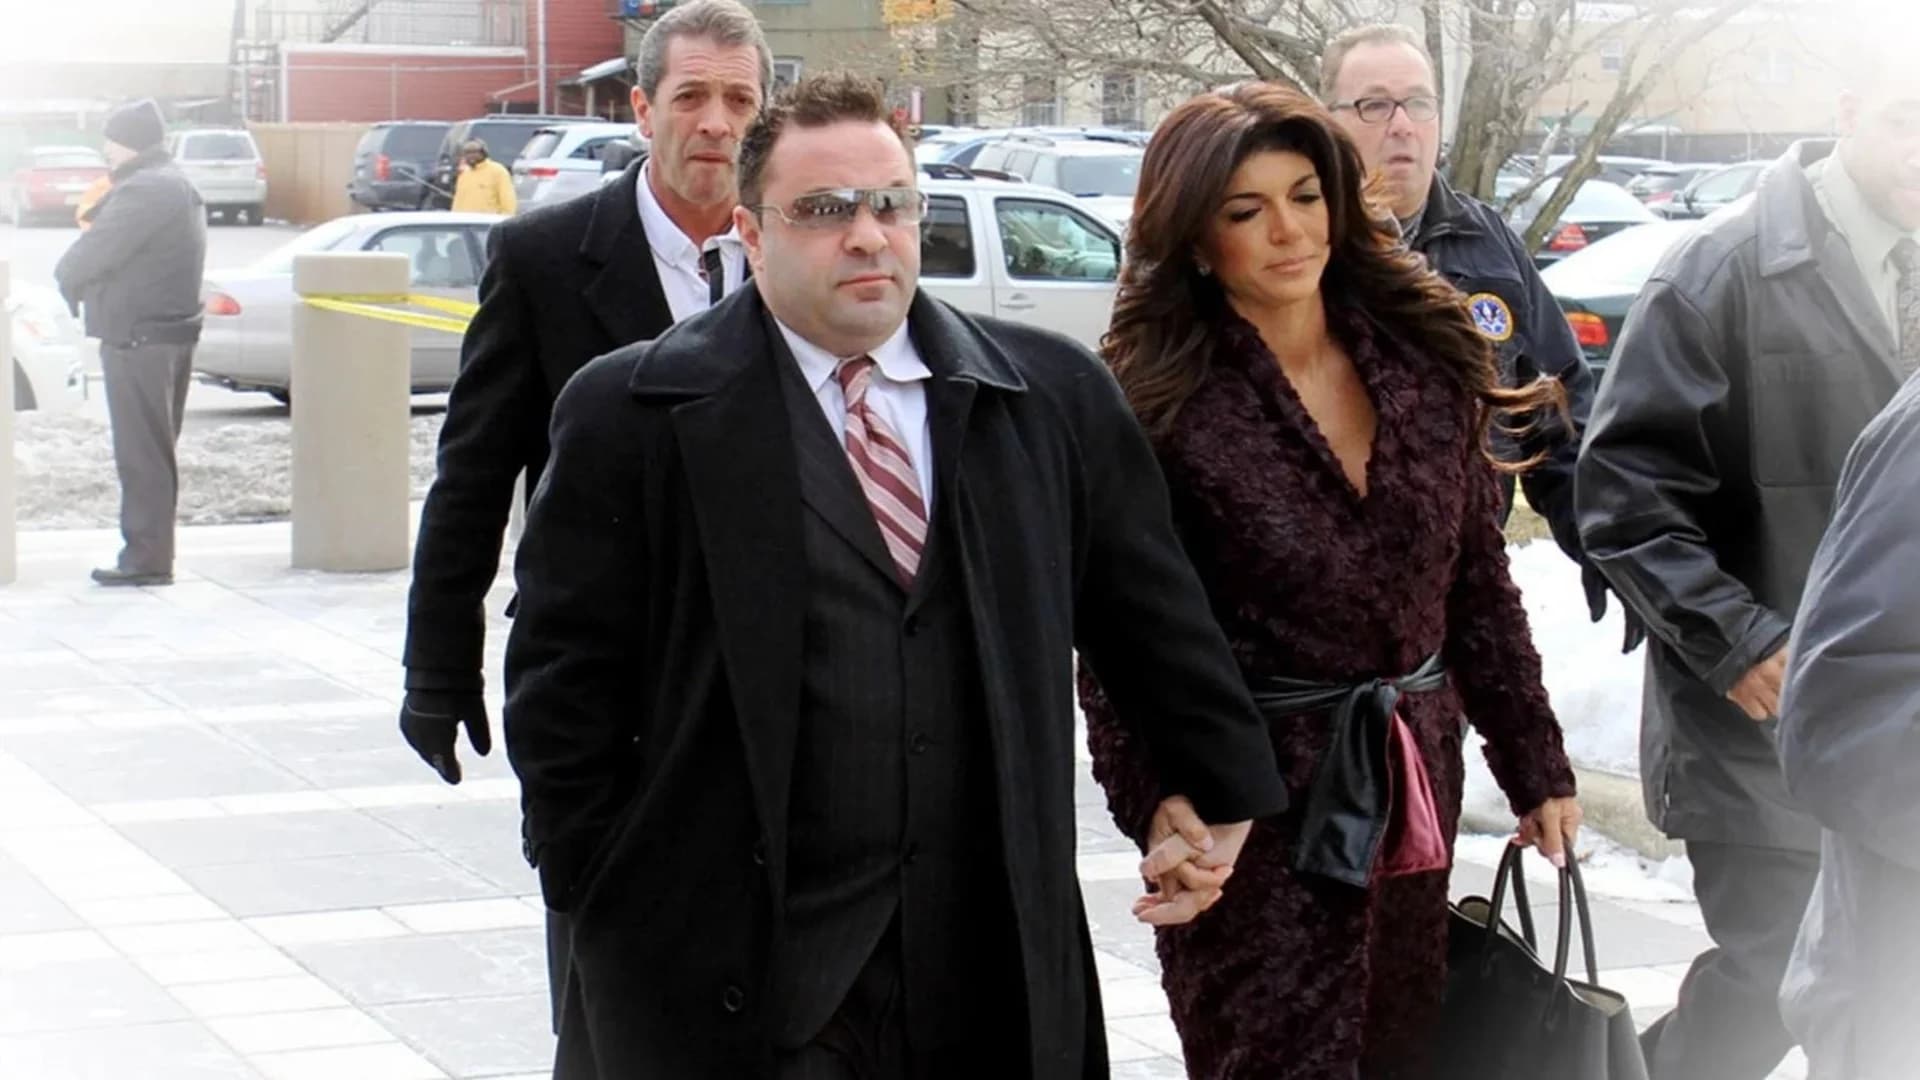 Report: ‘Real Housewives’ star Teresa Giudice will leave husband if he’s deported